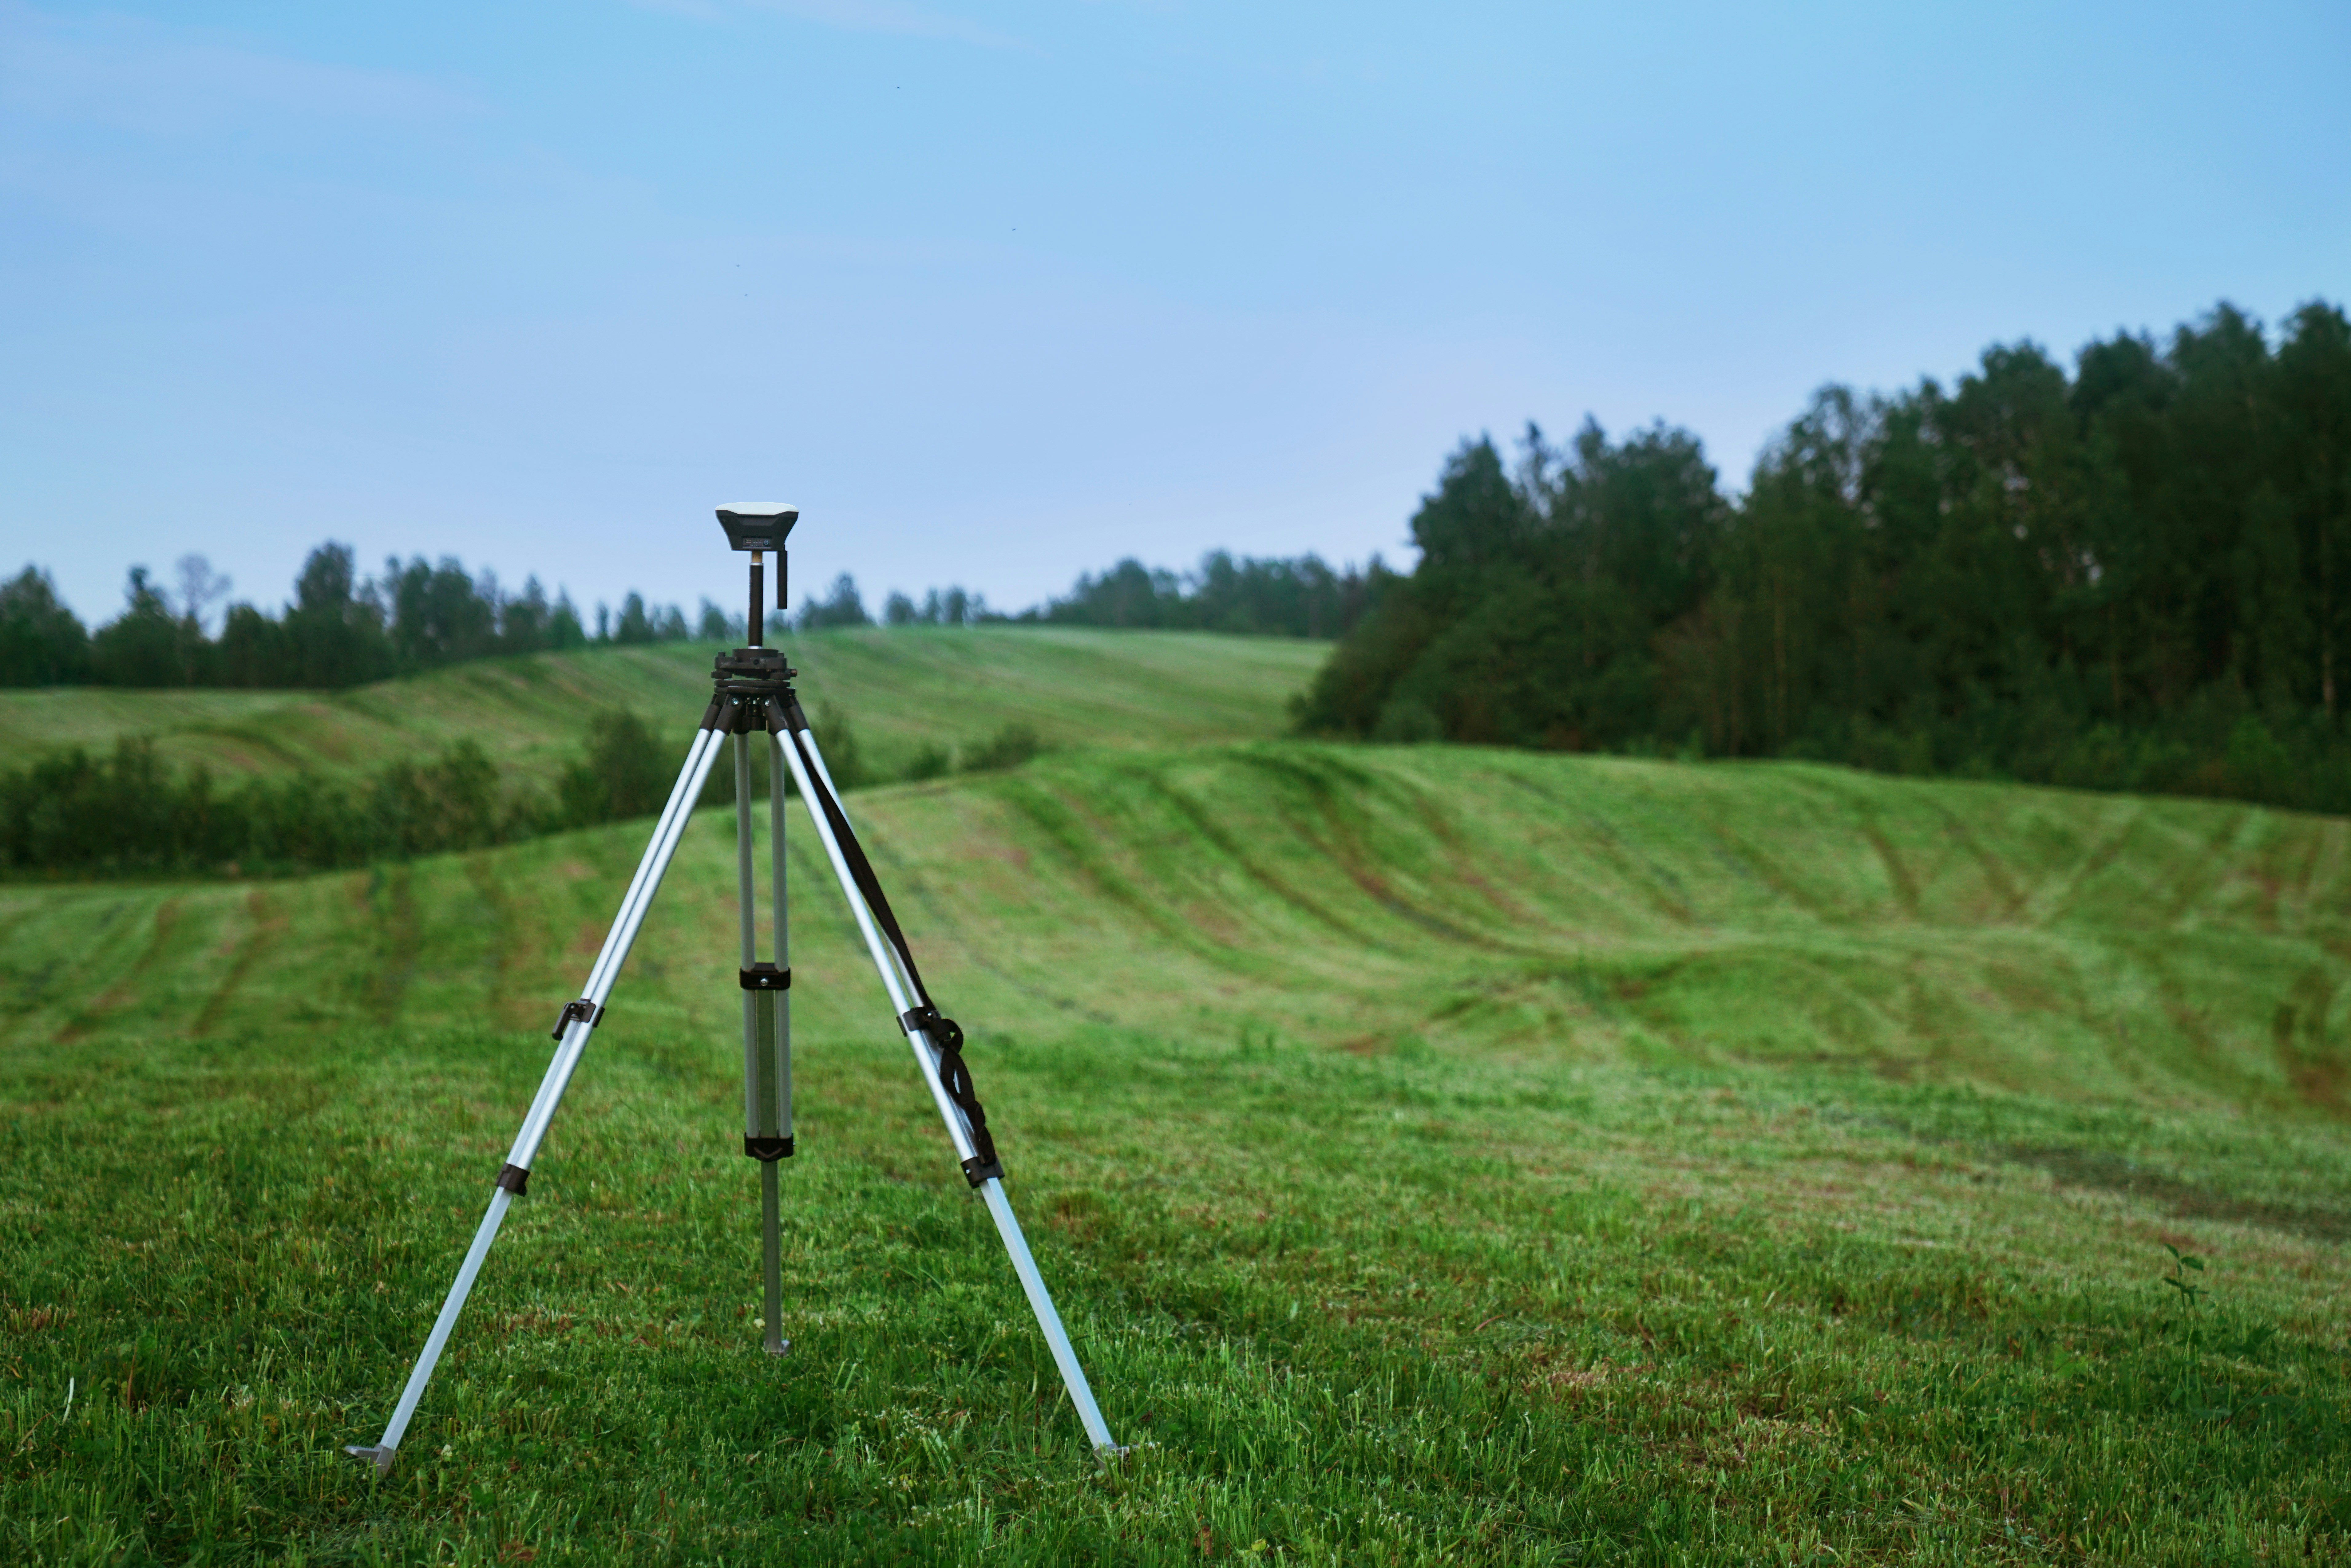 Precise positioning in the field